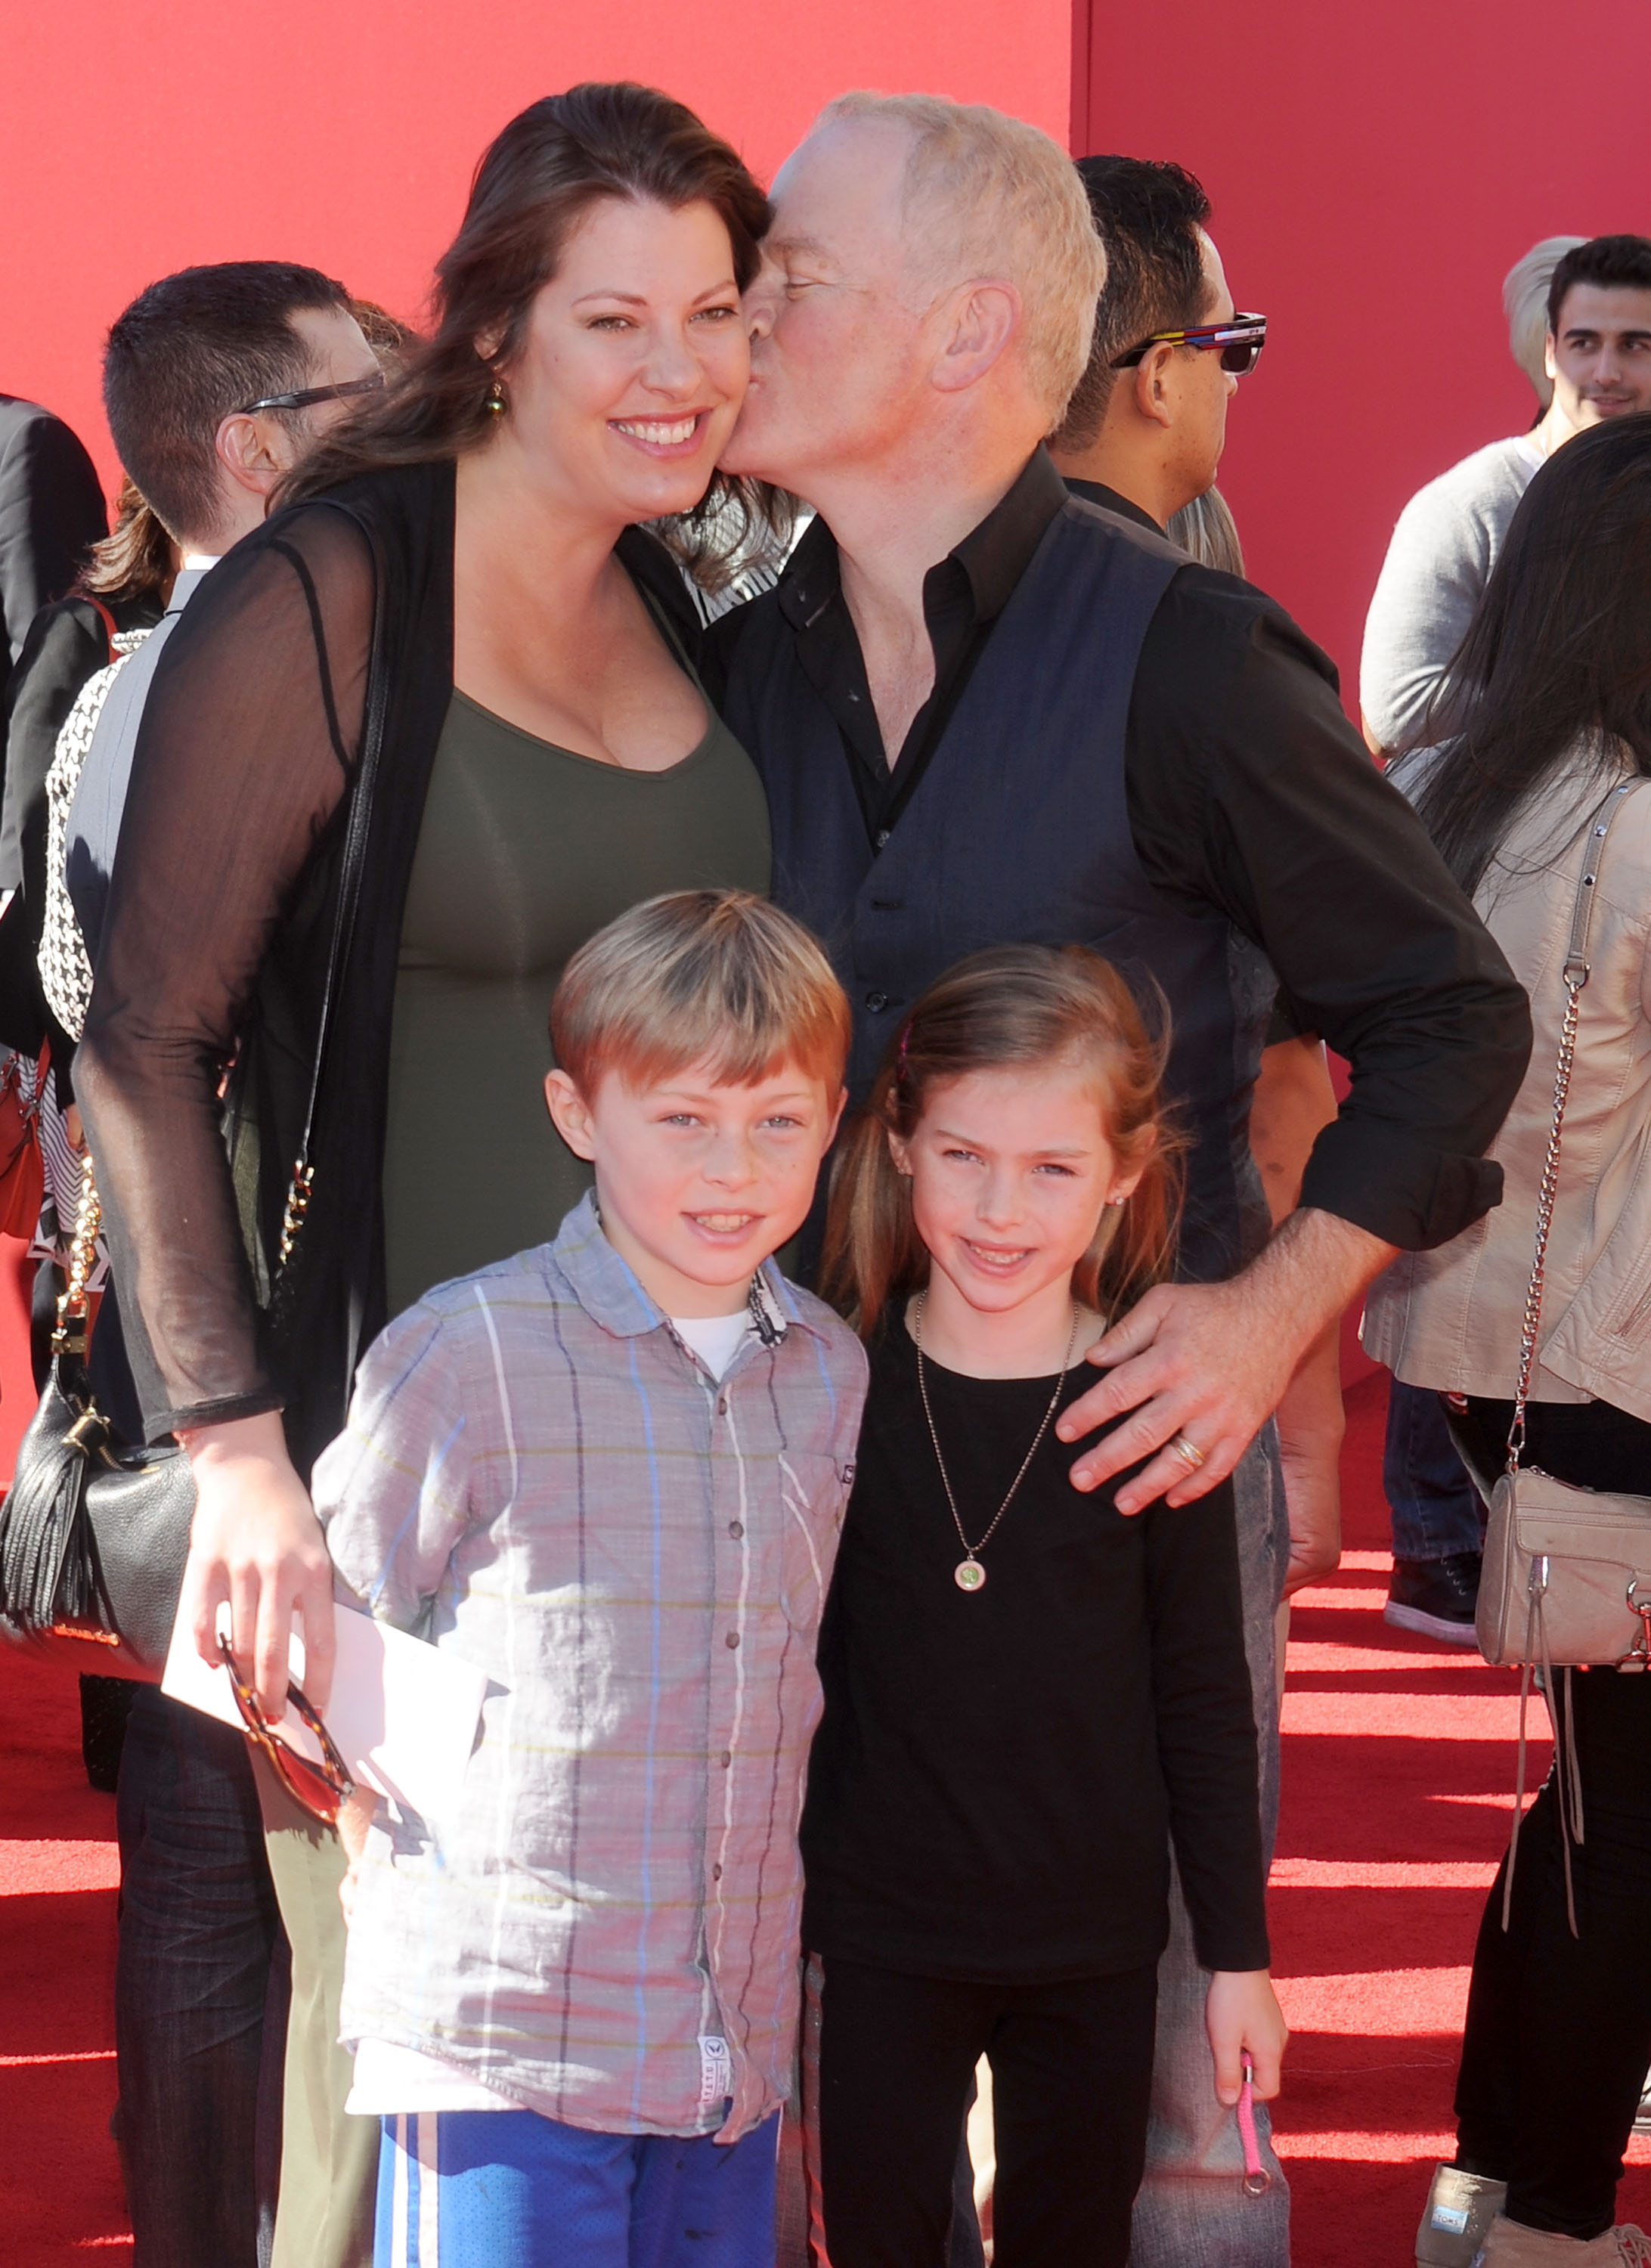 Actor Neal McDonough, wife Ruve Robertson and children arrive at the Los Angeles premiere of "The Lego Movie" at Regency Village Theatre on February 1, 2014, in Westwood, California. | Source: Getty Images